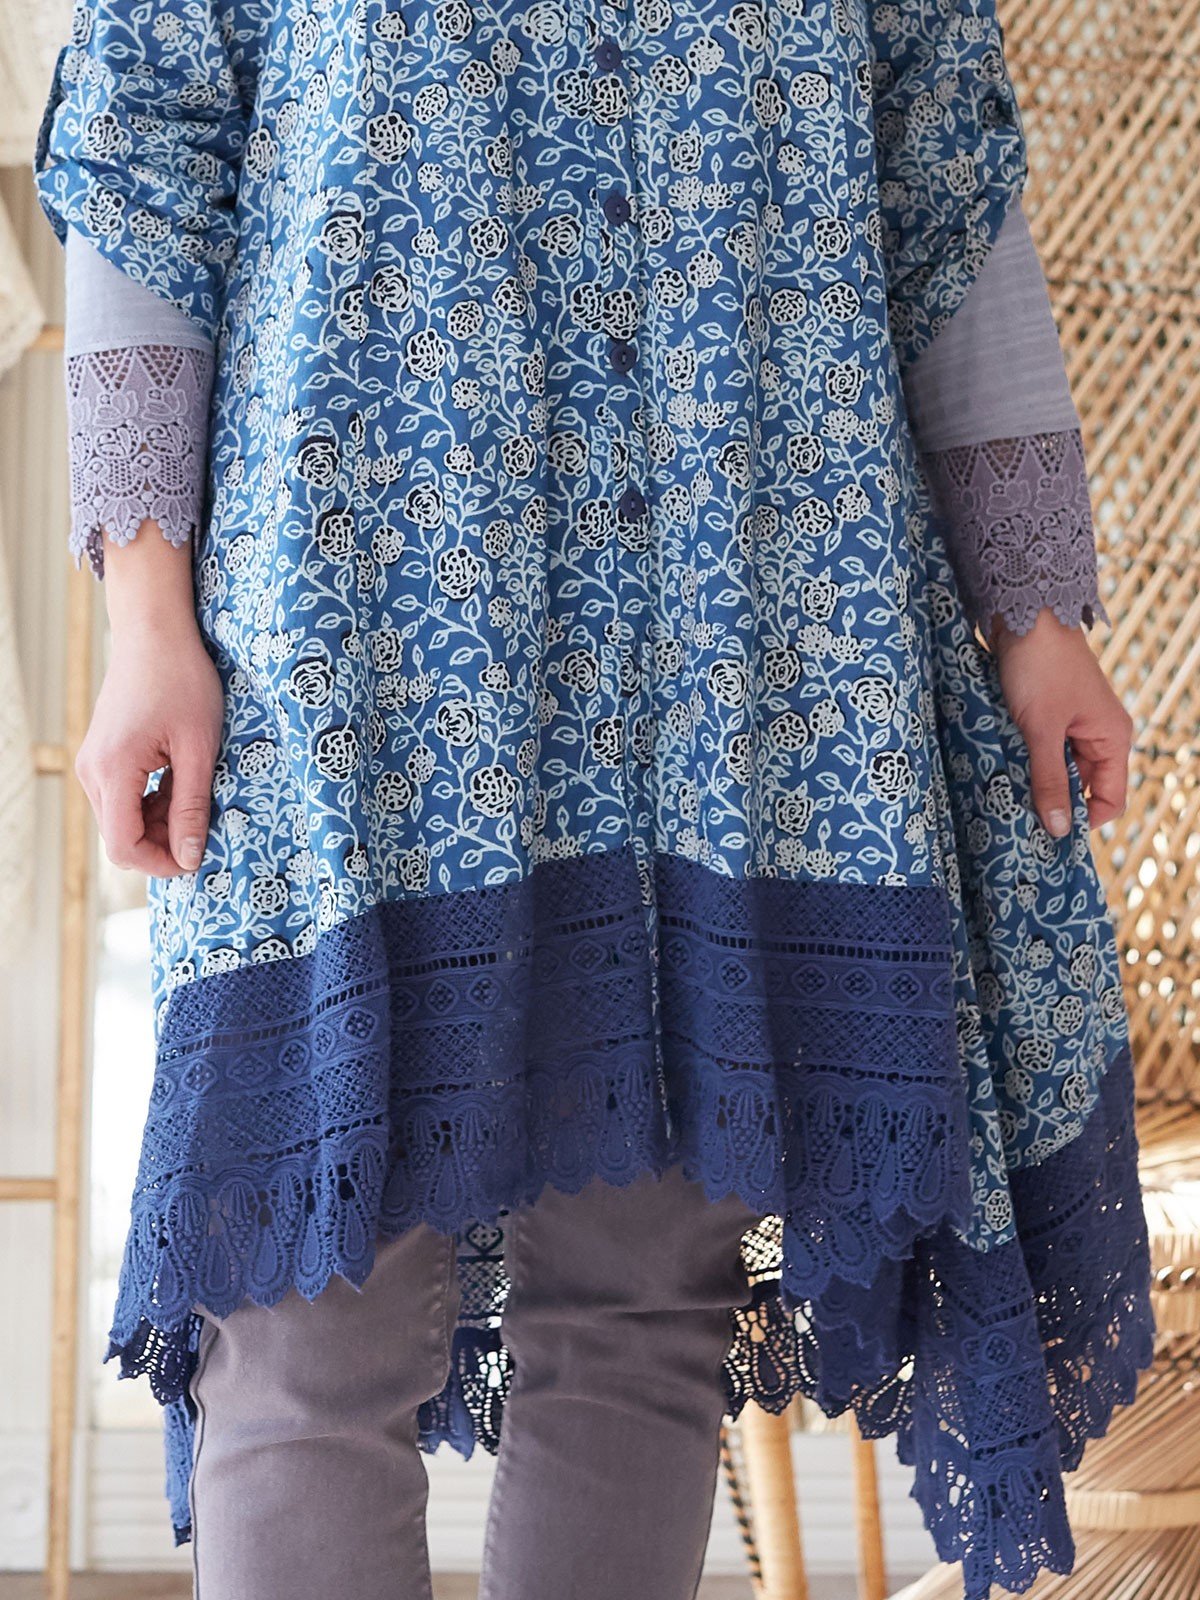 Ingalls Tunic in Indigo | April Cornell - SOLD OUT